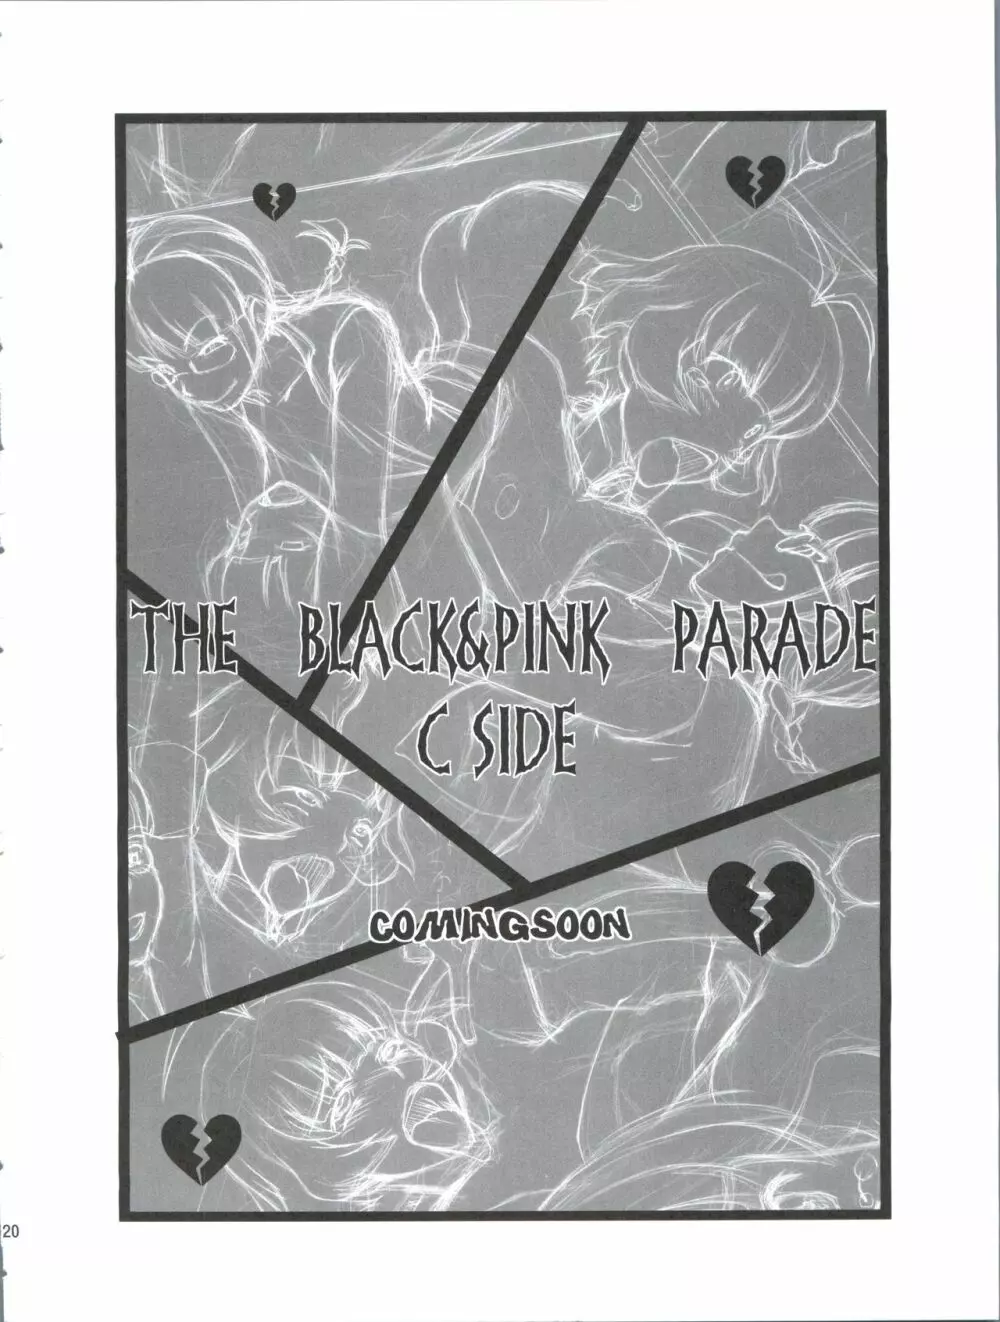 THE BLACK & PINK PARADE B-SIDE - page19